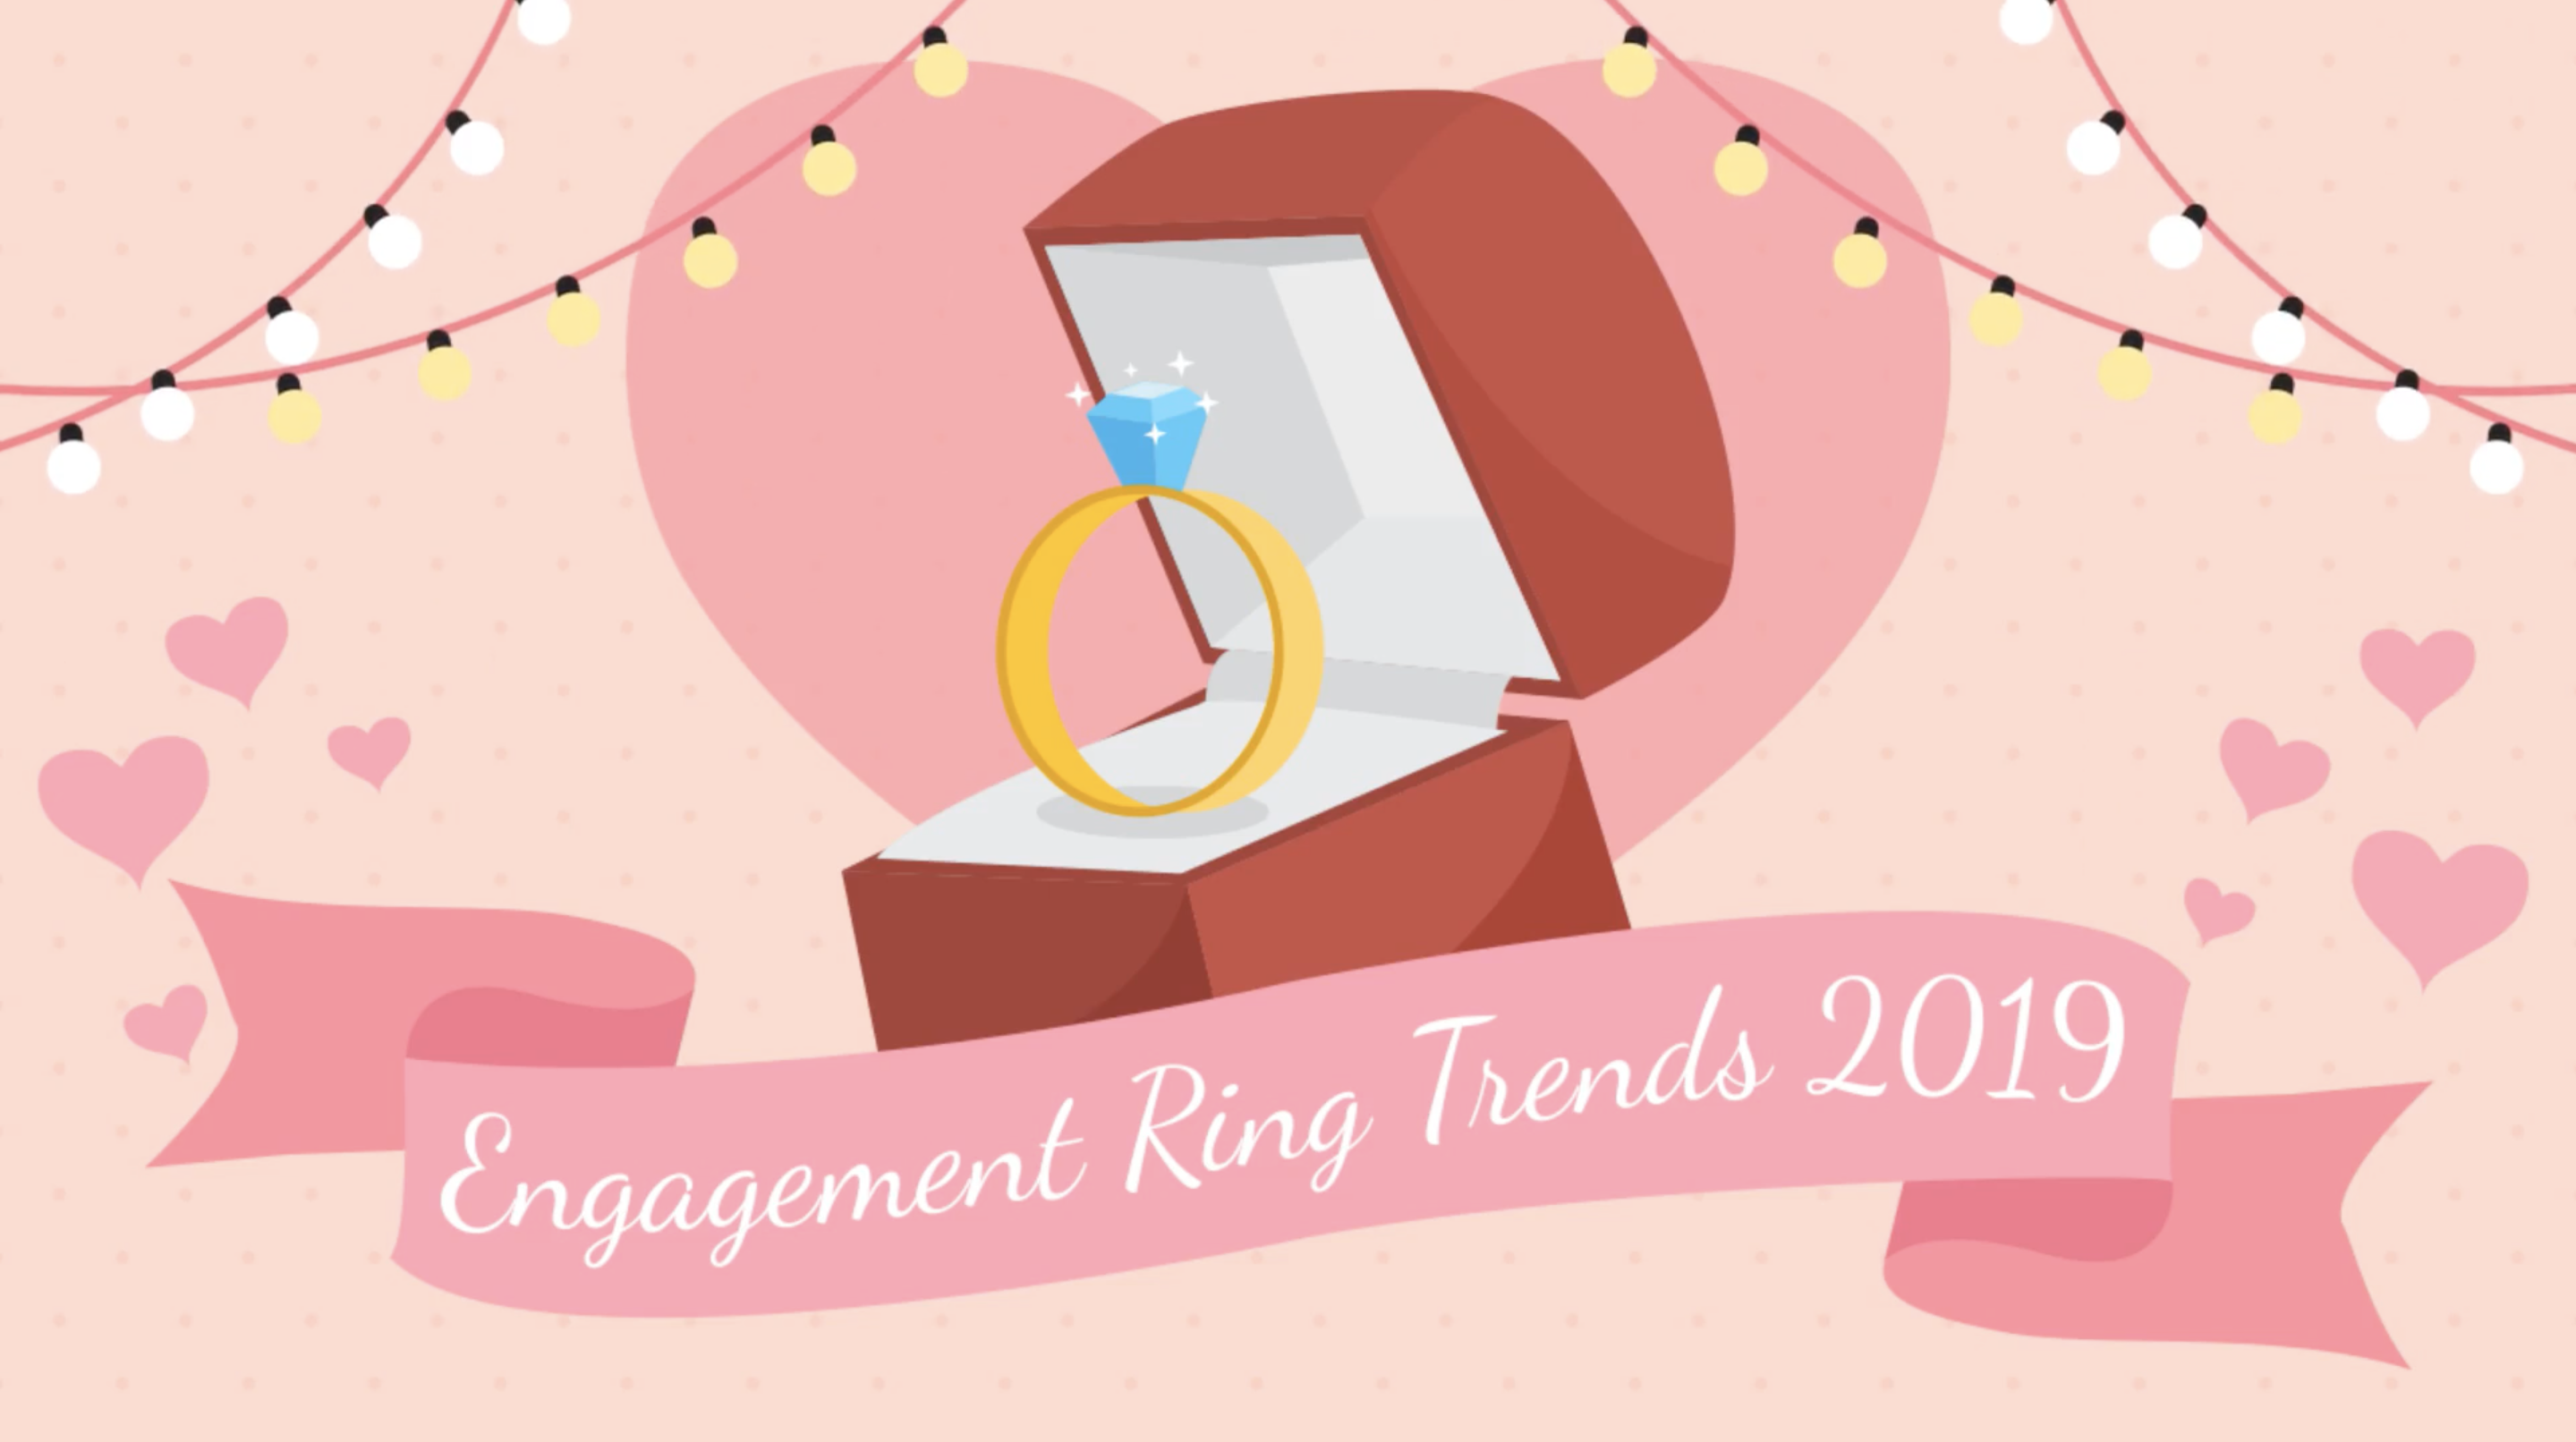 Watch this 2 min awesome Engagement Ring Trends Guide Video to better understand how to pick the perfect engagement ring for you. // Topics: Trending Stone Shapes, Metal Trends, Ring Gemstones, Ring Customization and more. // Provided by Loyes Diamonds // mysweetengagement.com